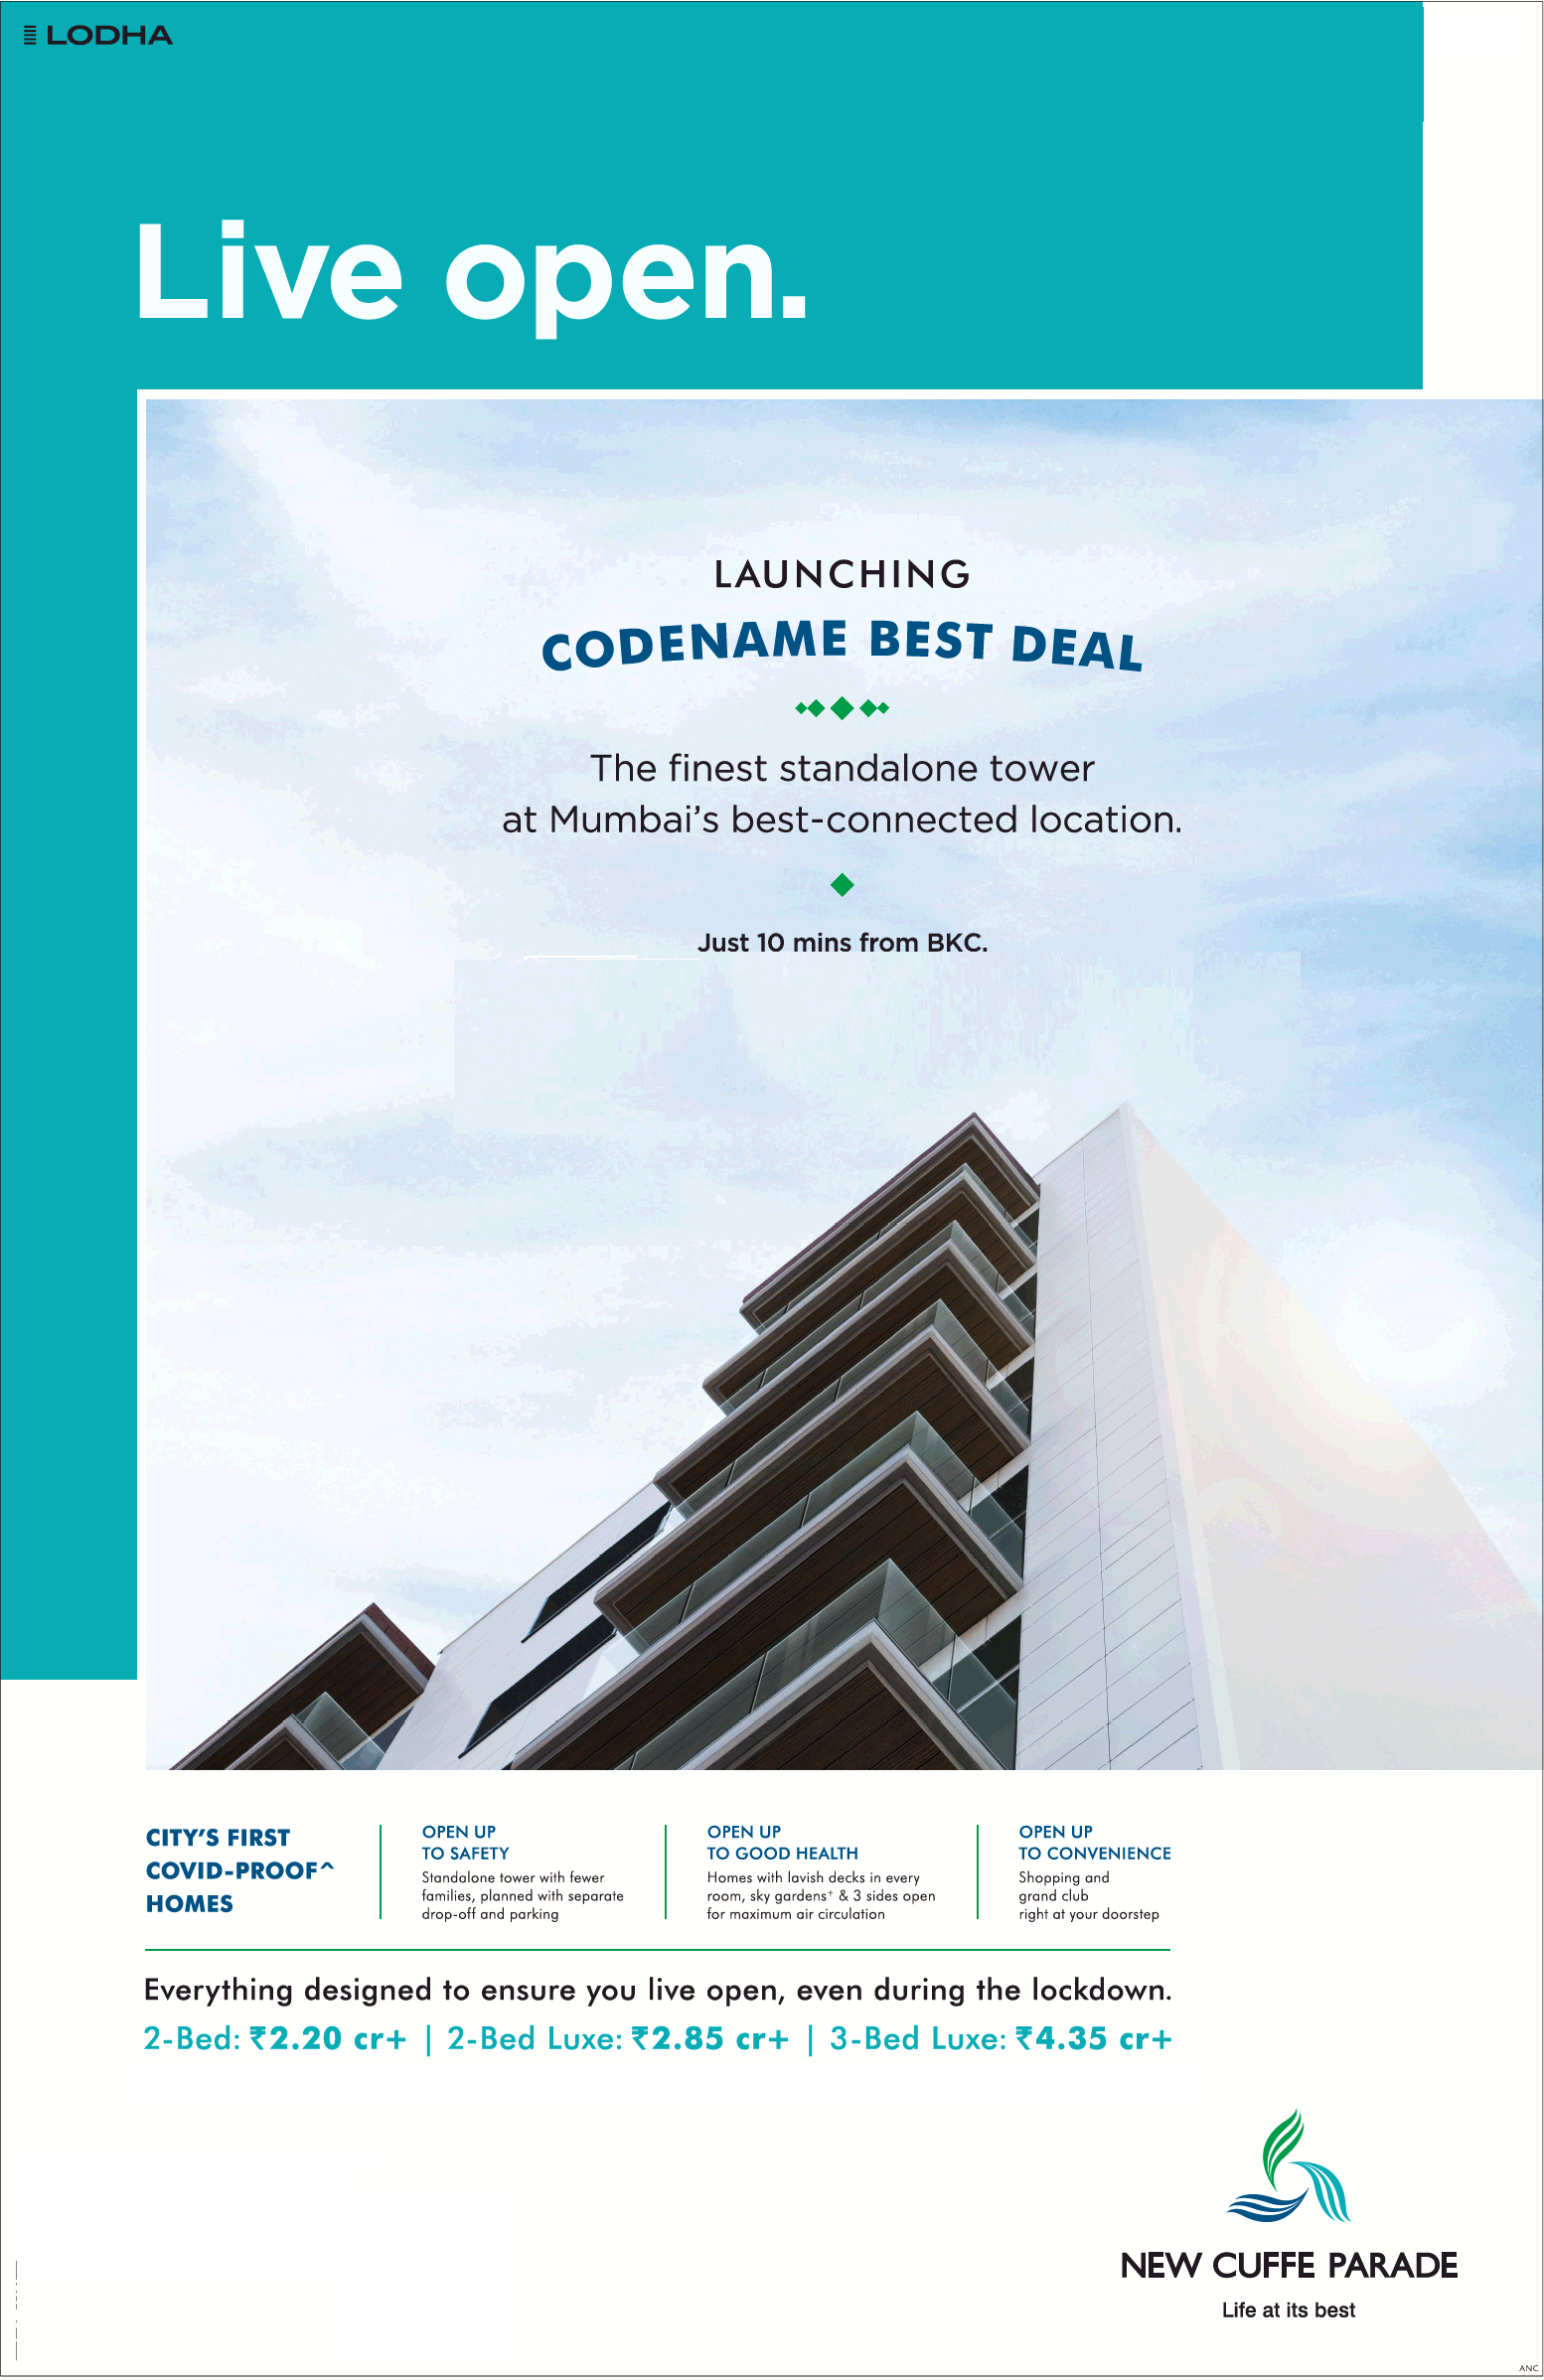 Launching Codename best deals with the finest standalone tower at Mumbai's best-connected location Update